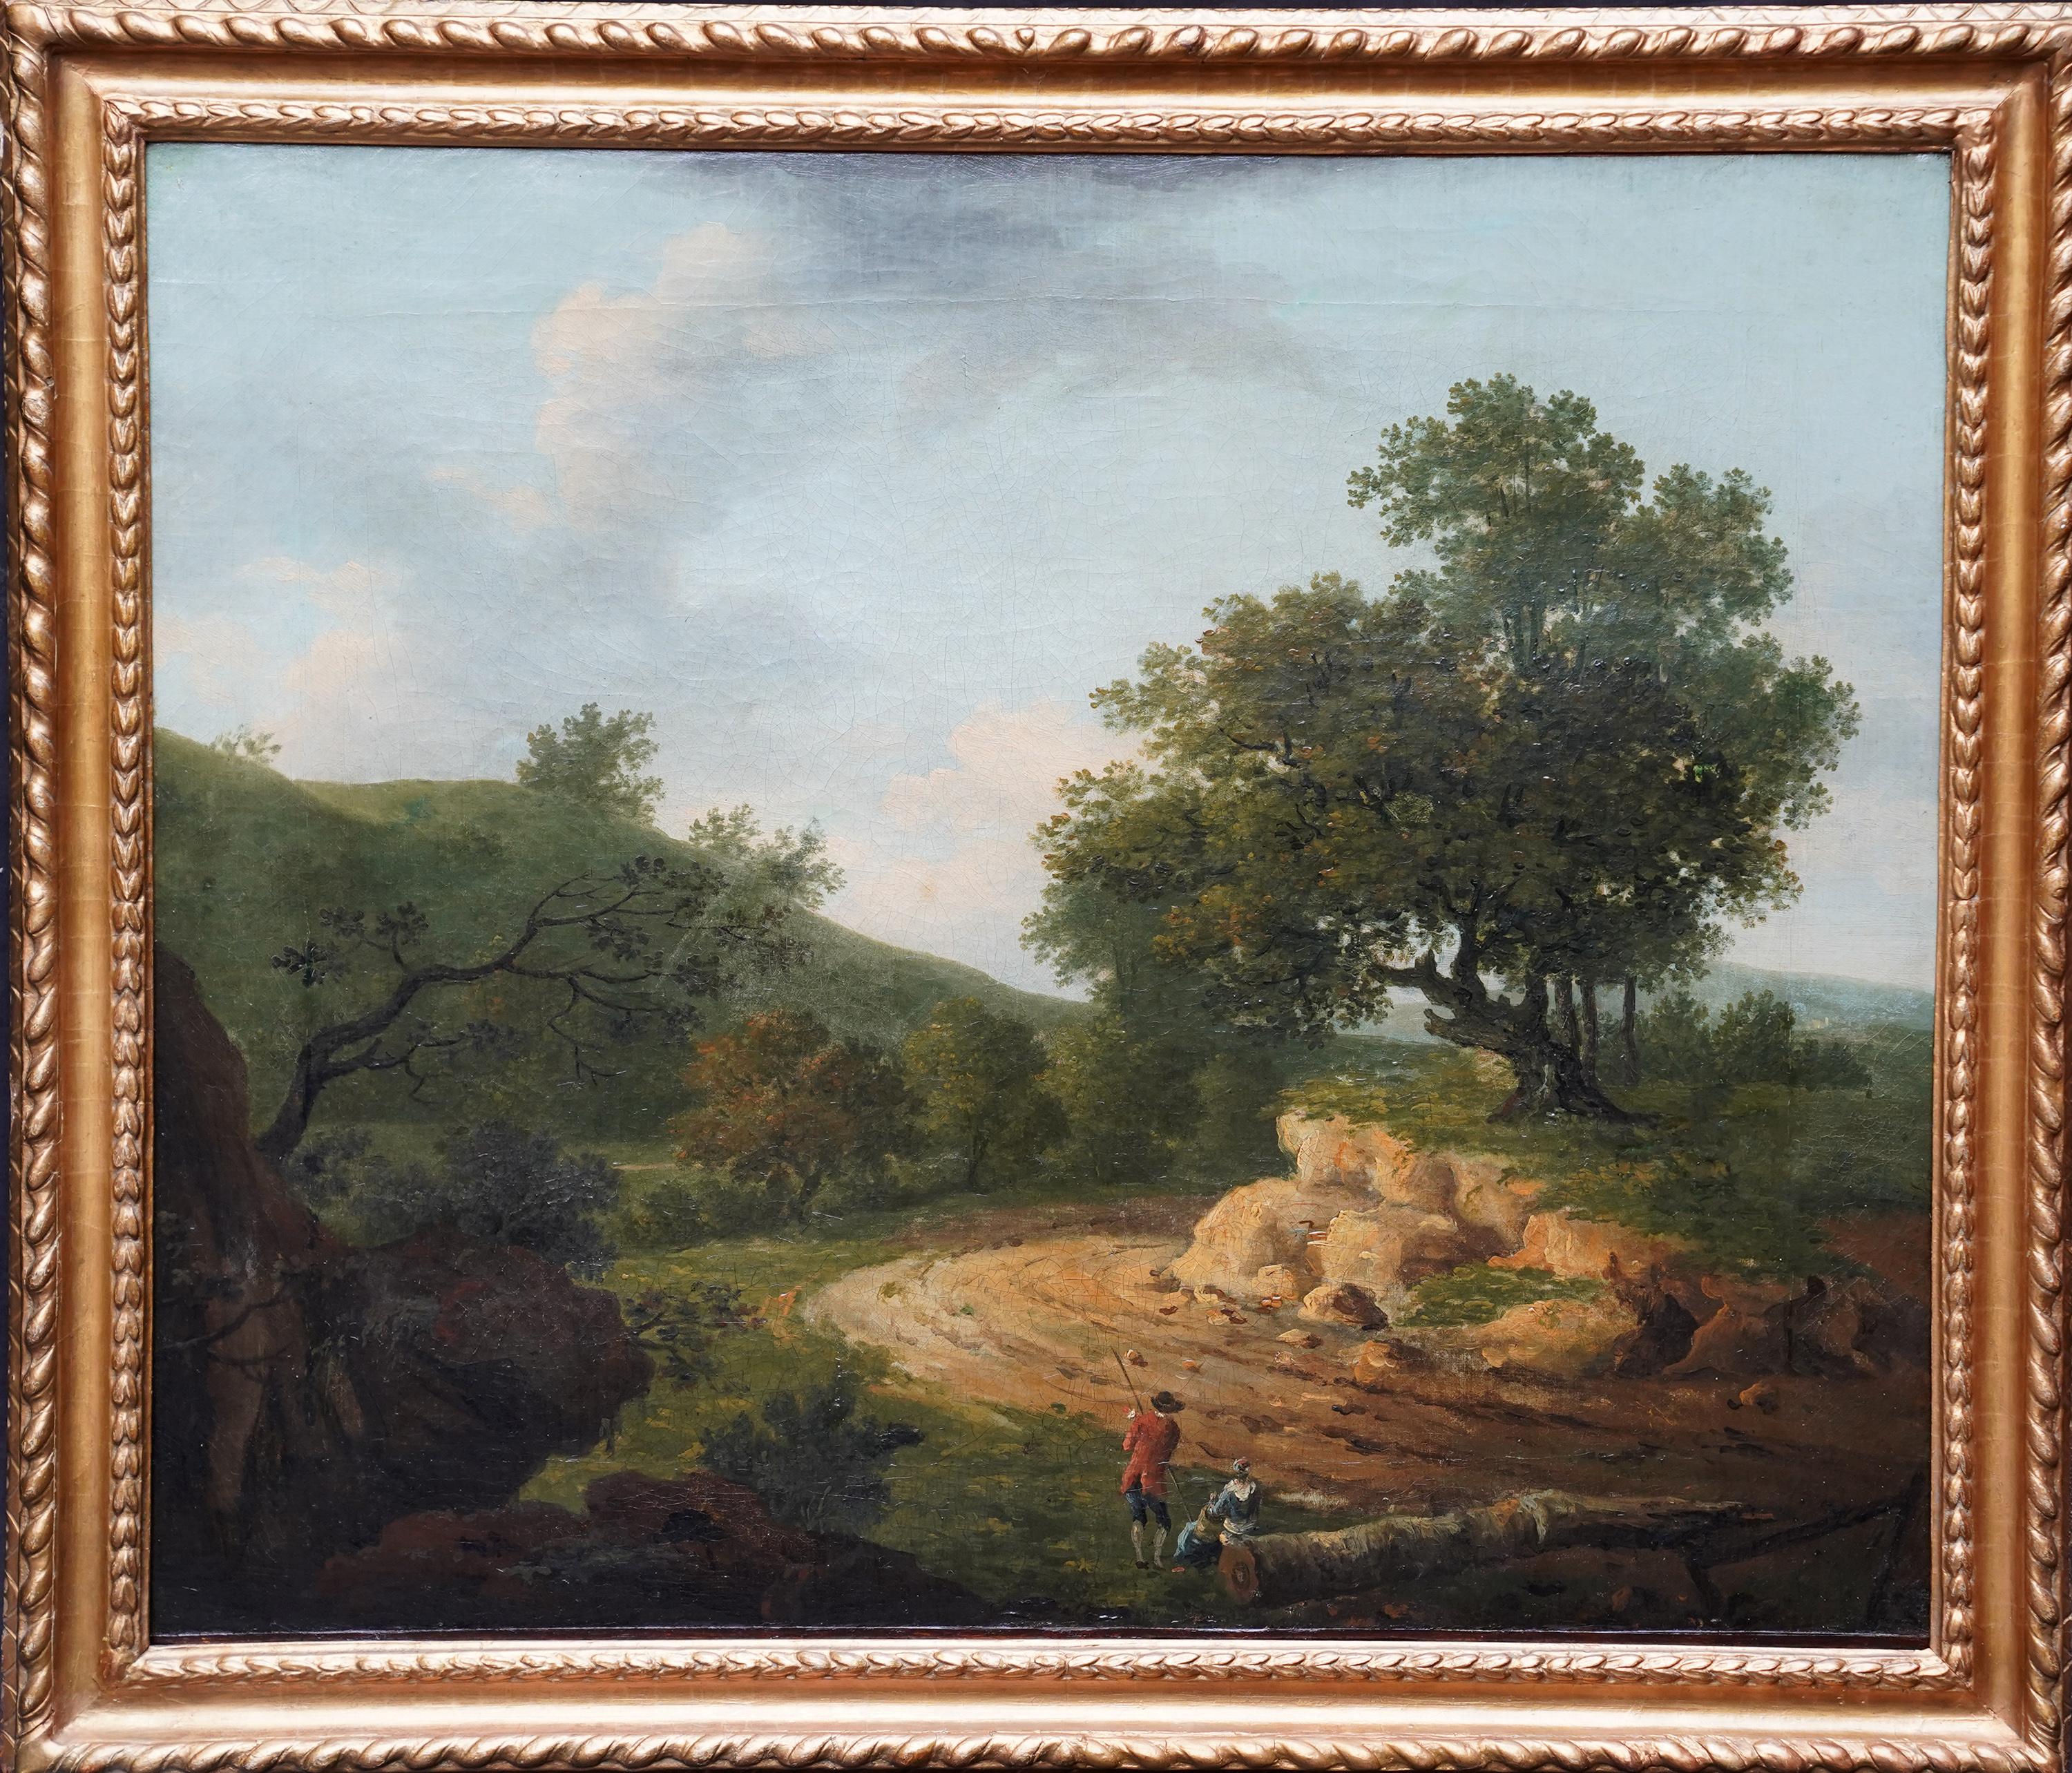 Wooded Landscape with Figures - British 18th century Old Master art oil painting 5